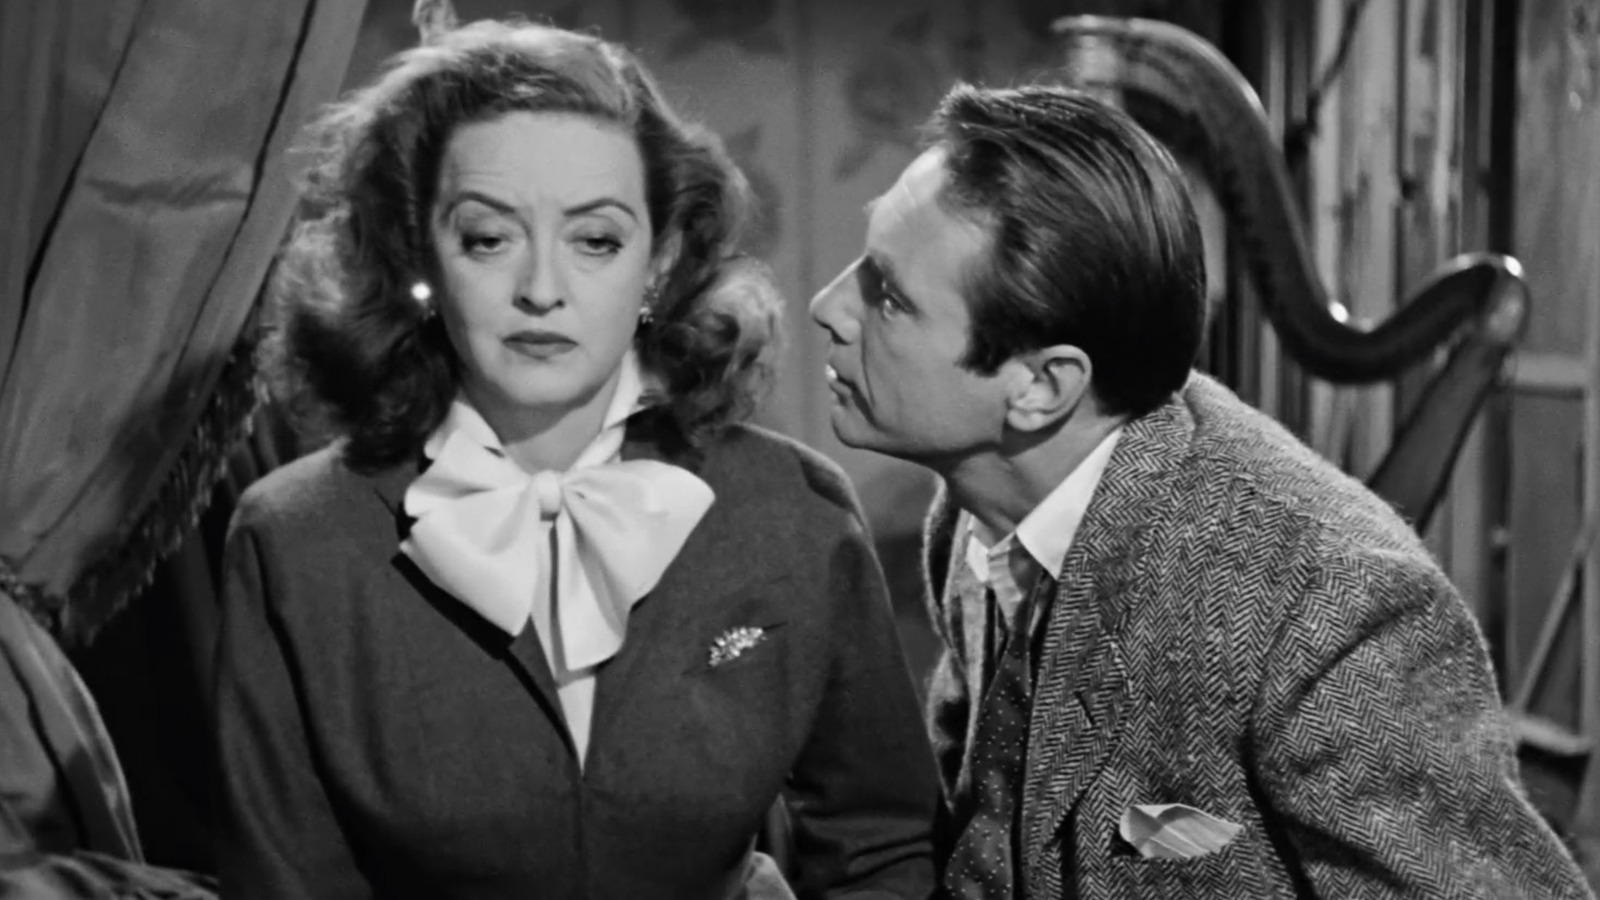 #How An Unassuming Scene In All About Eve Became A Source Of Controversy